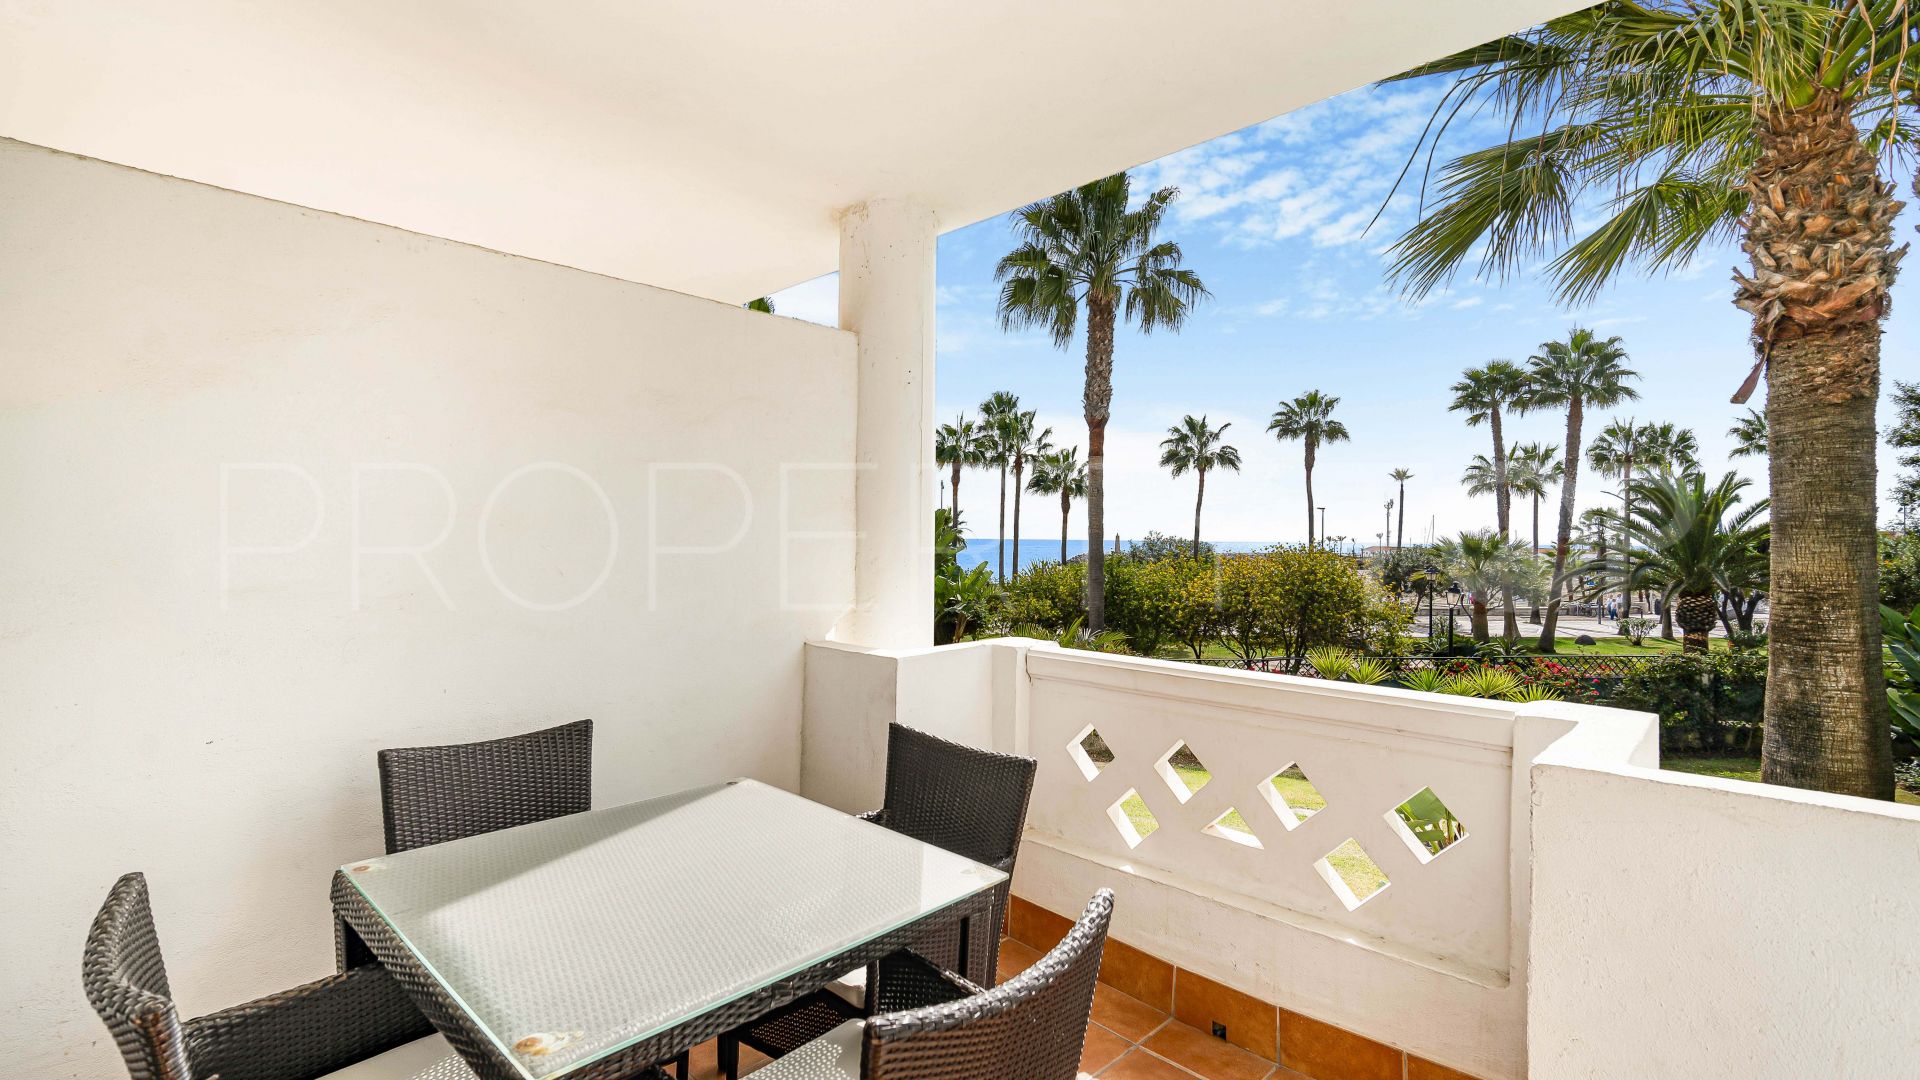 Ground floor apartment with 2 bedrooms for sale in Playa Rocio